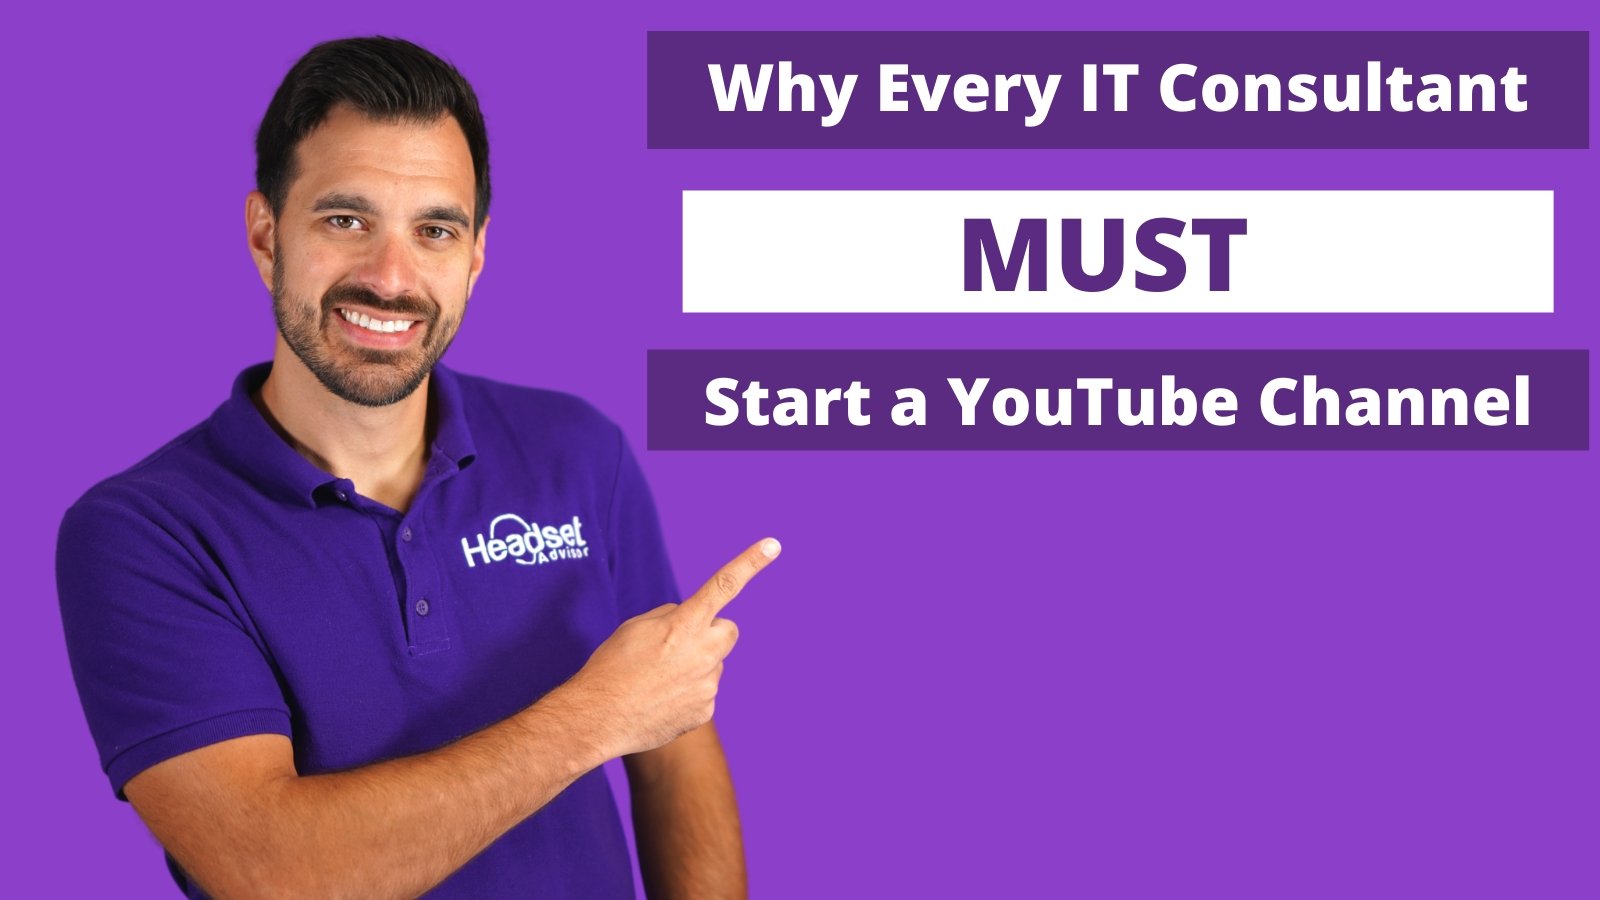 Why Every IT Consultant Must Start A YouTube Channel - Headset Advisor